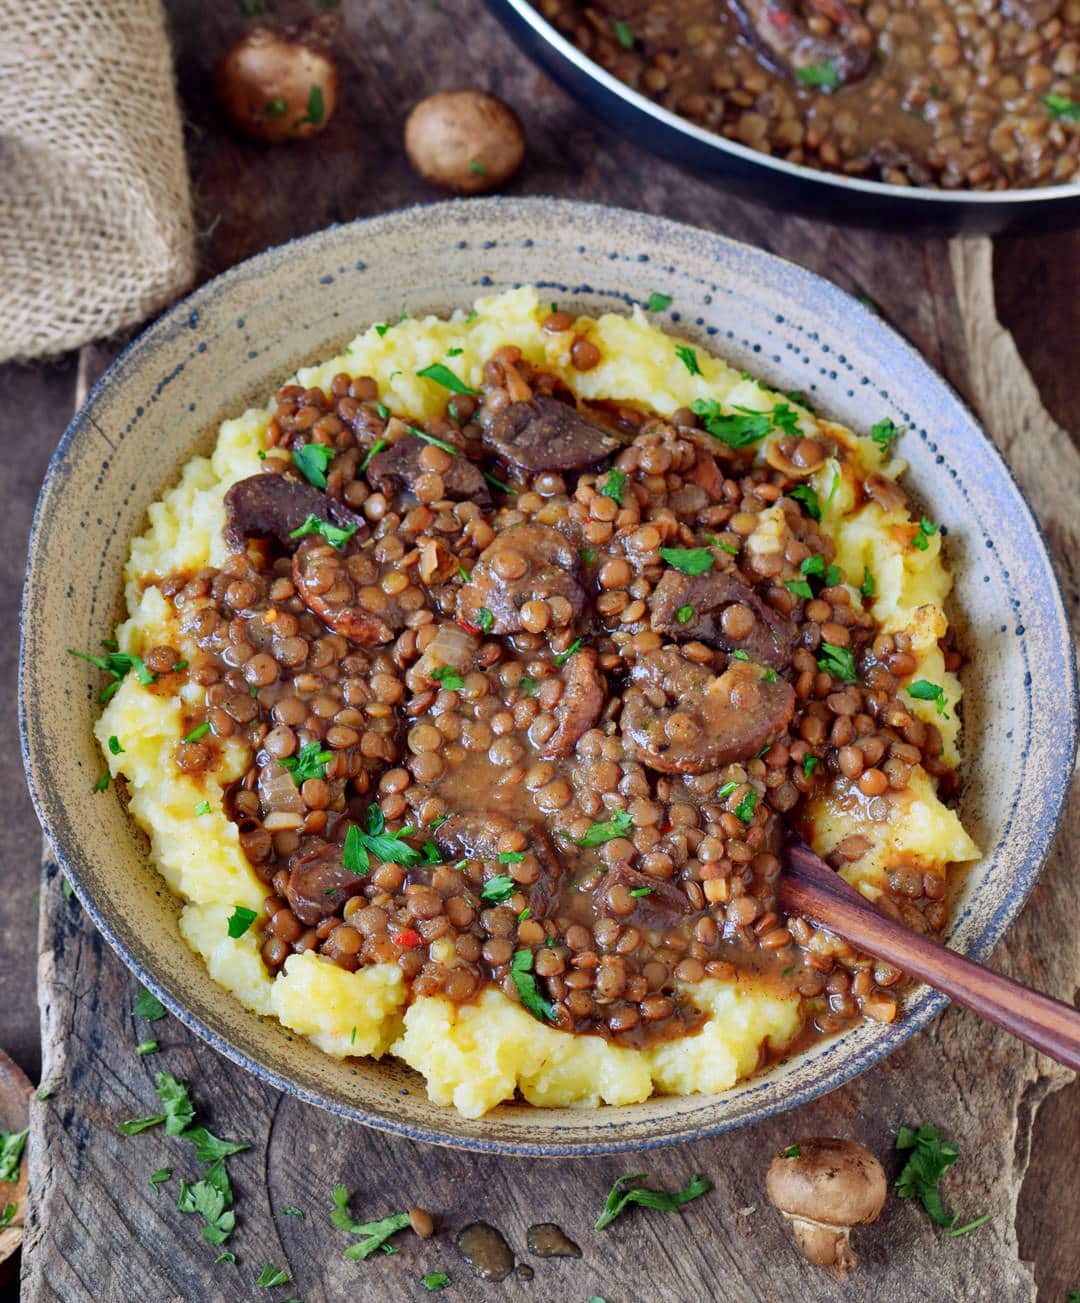 Easy lentil stew with mashed potatoes and mushrooms in a bowl.